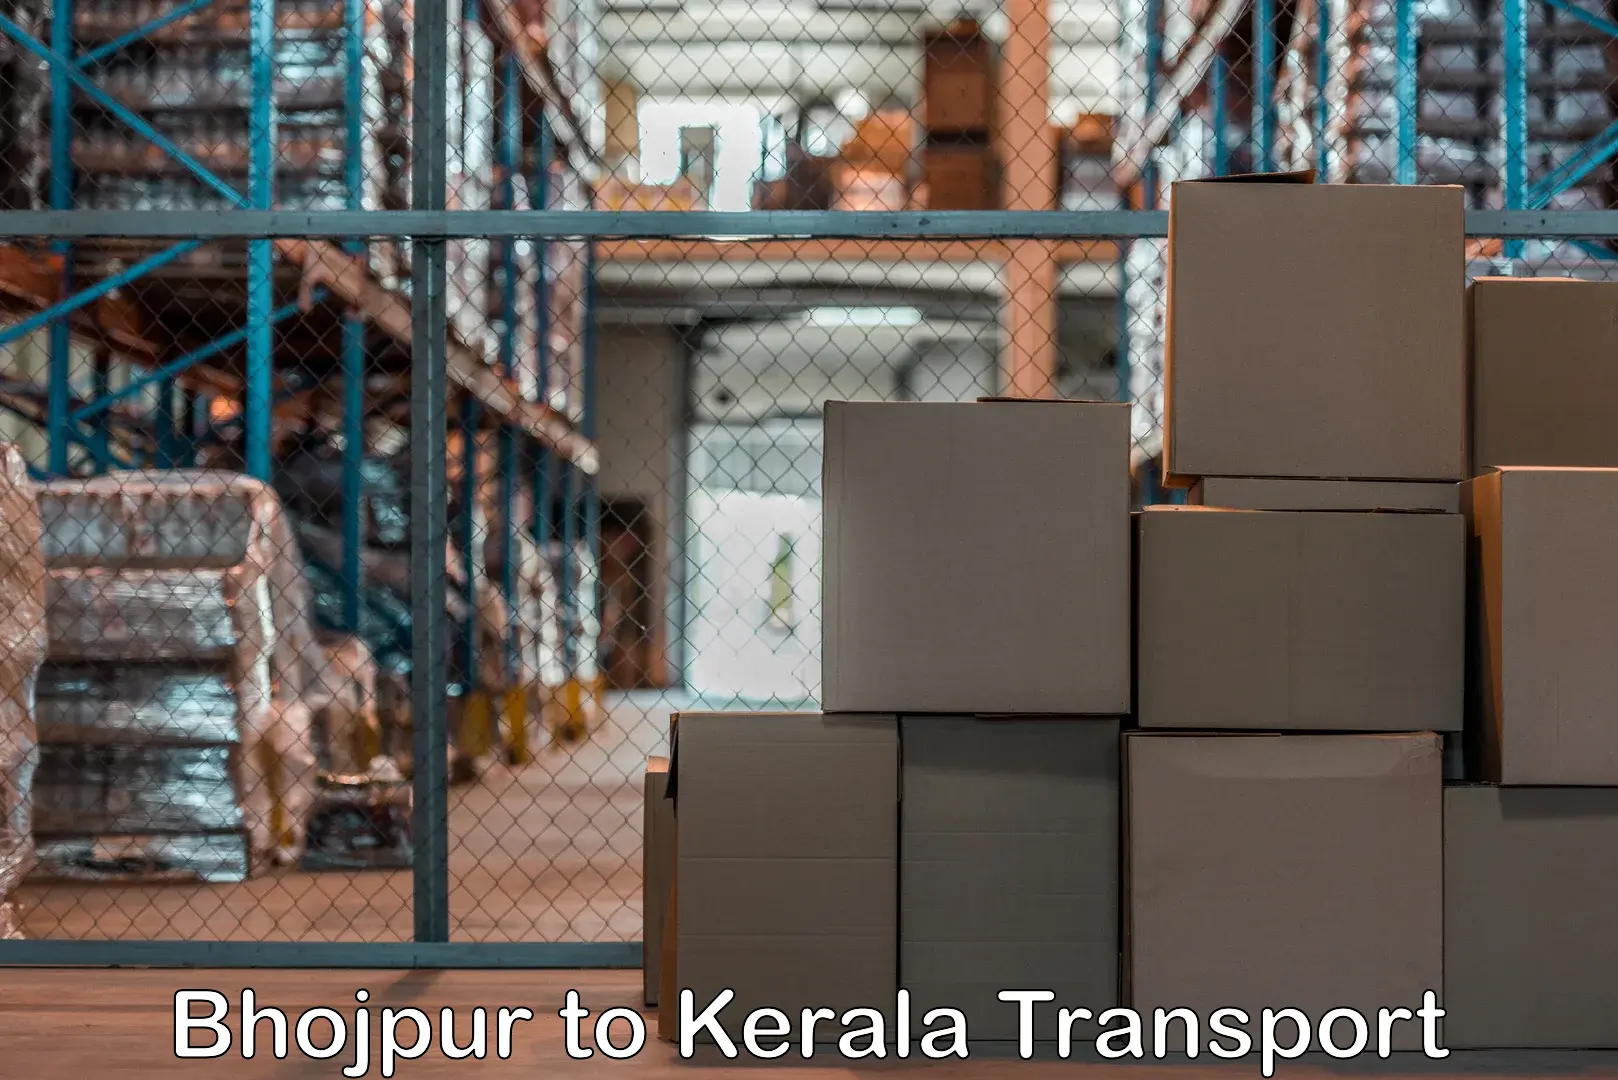 Truck transport companies in India Bhojpur to Chengannur